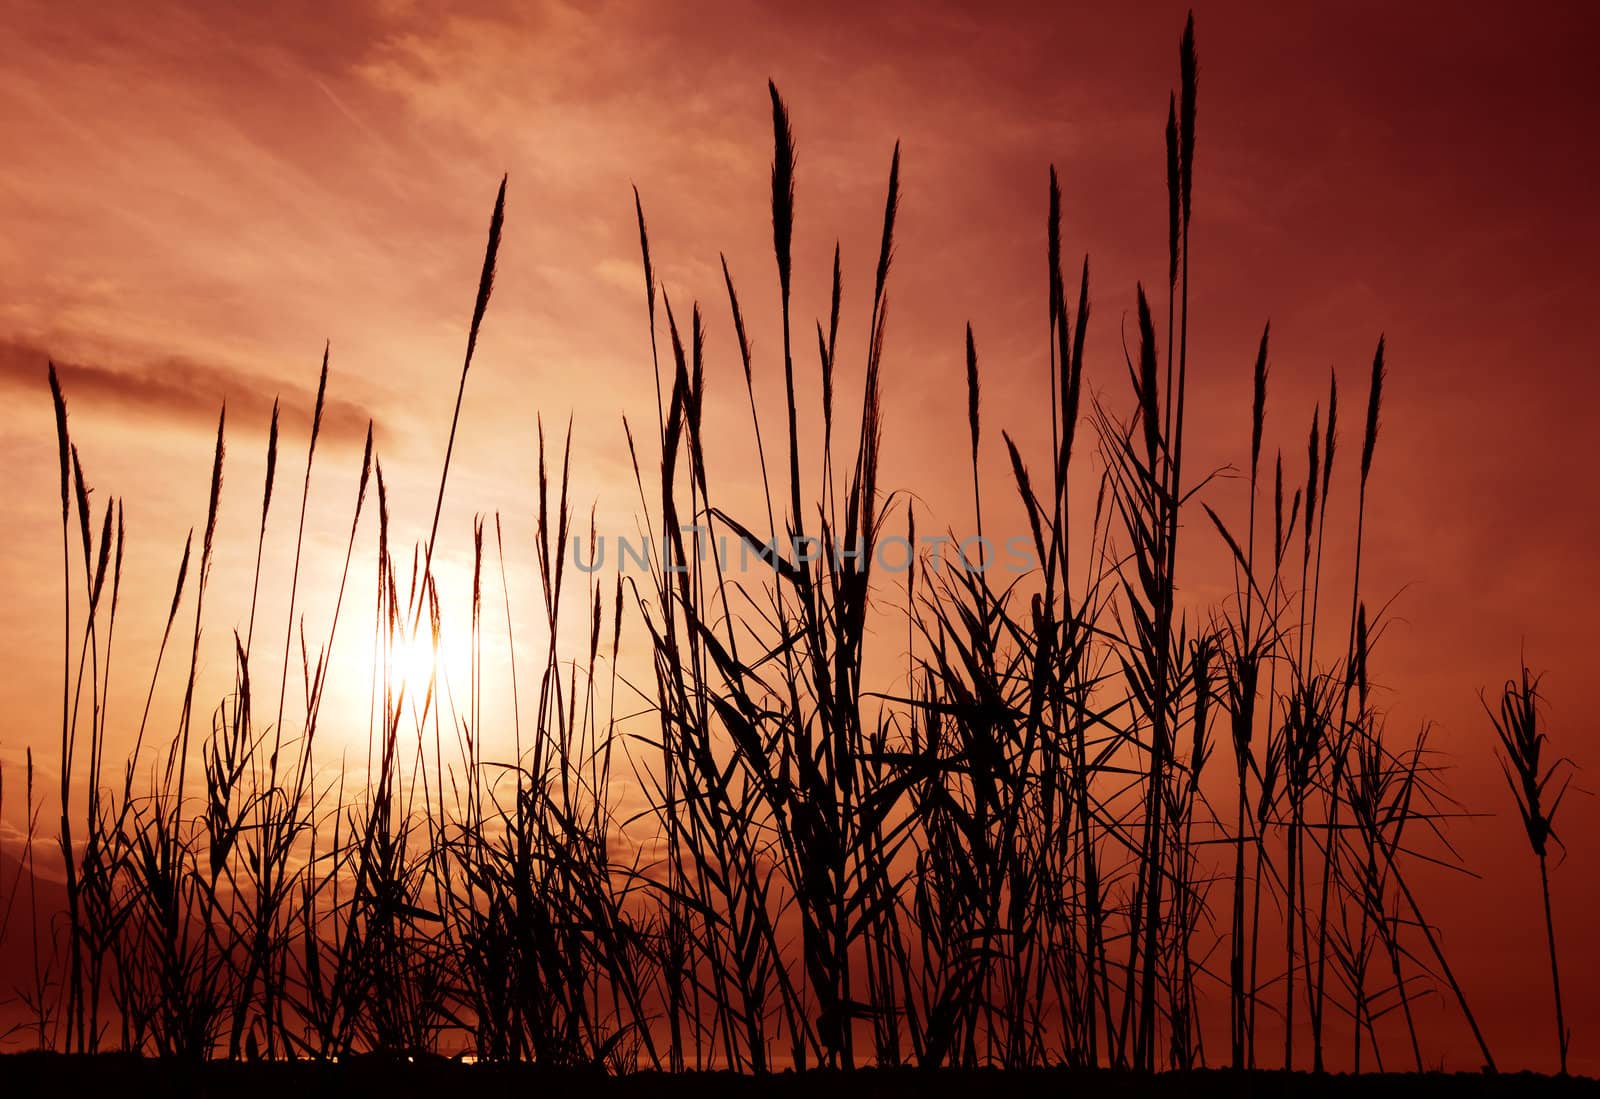 Reeds aganst a red sky by akarelias